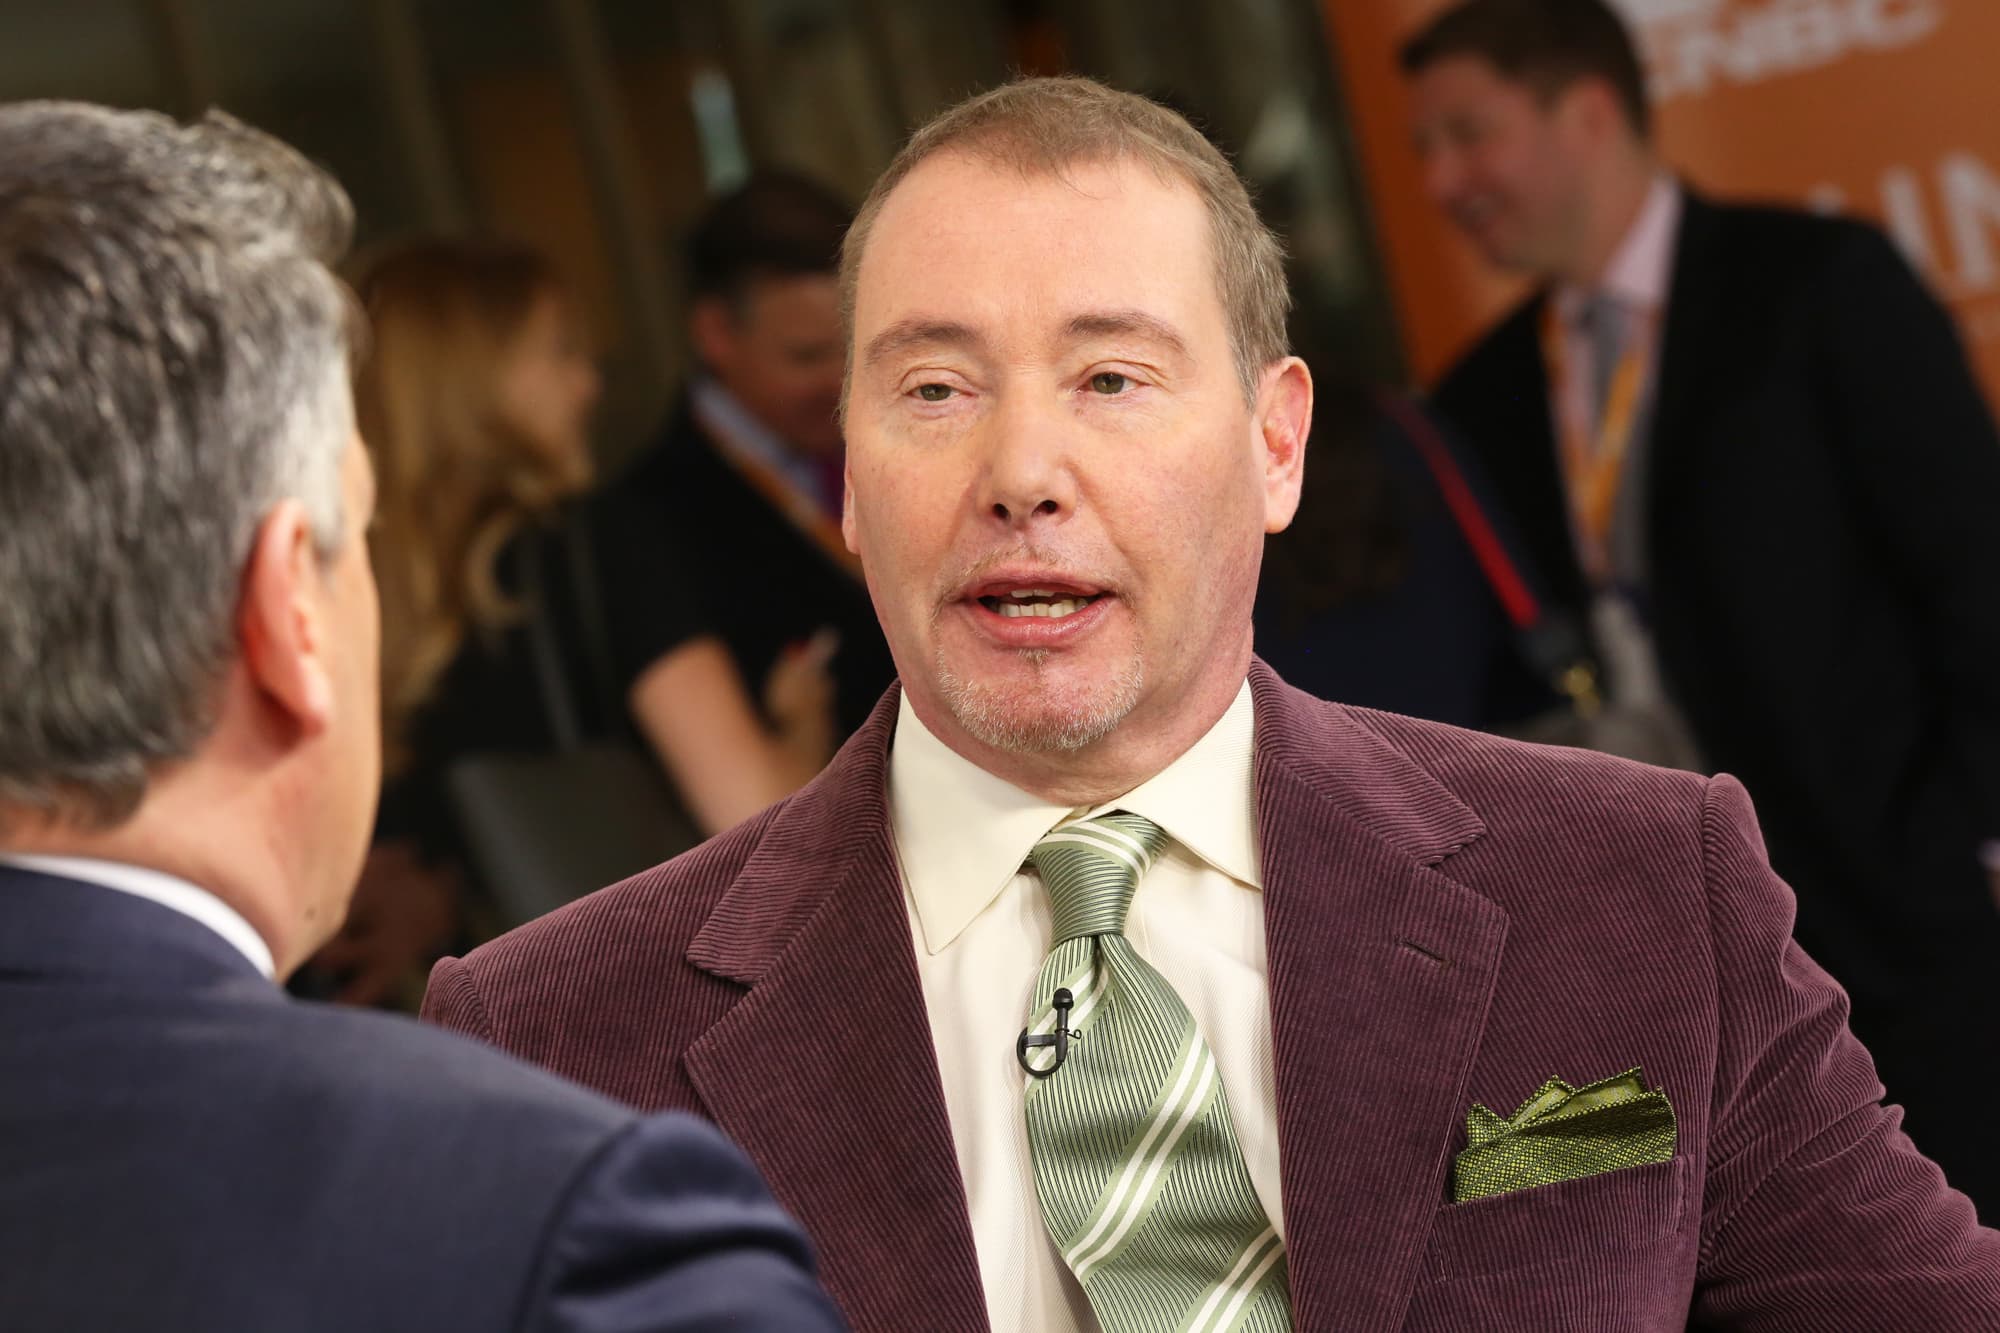 DoubleLine's Gundlach says it's time to buy emerging market stocks as the dollar peaks